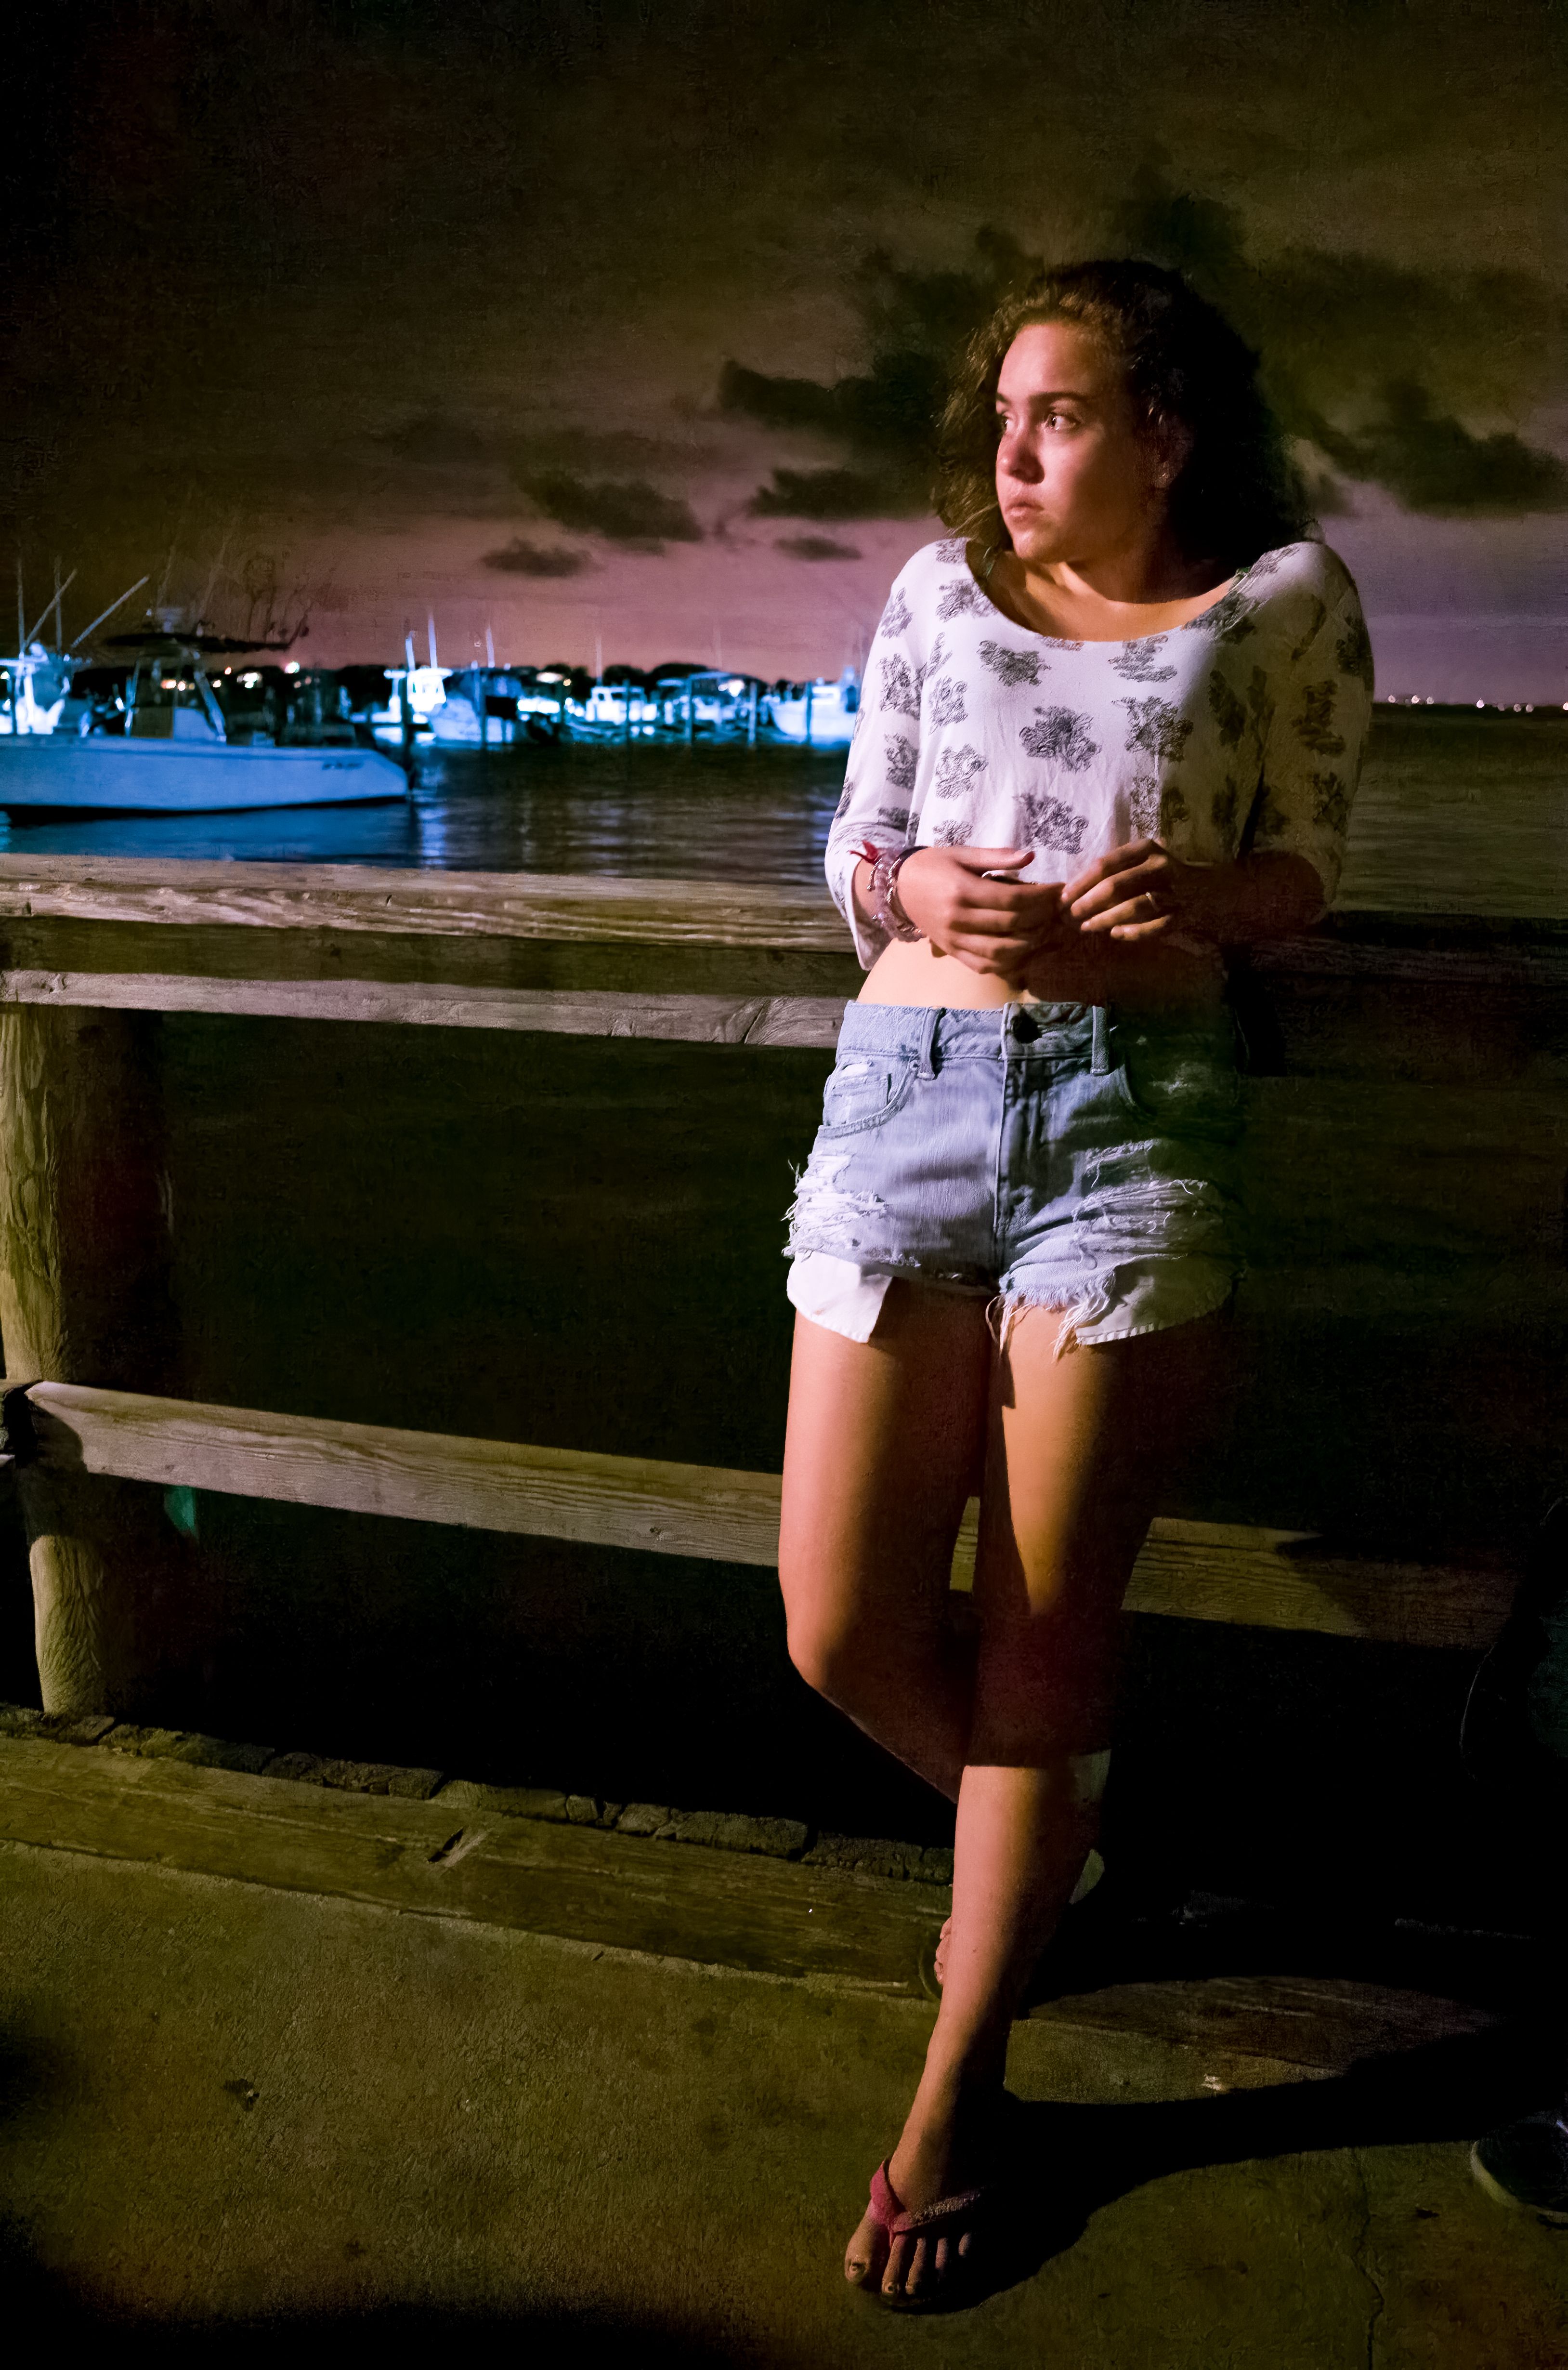 Teenage girl stands on fence at night in Marina